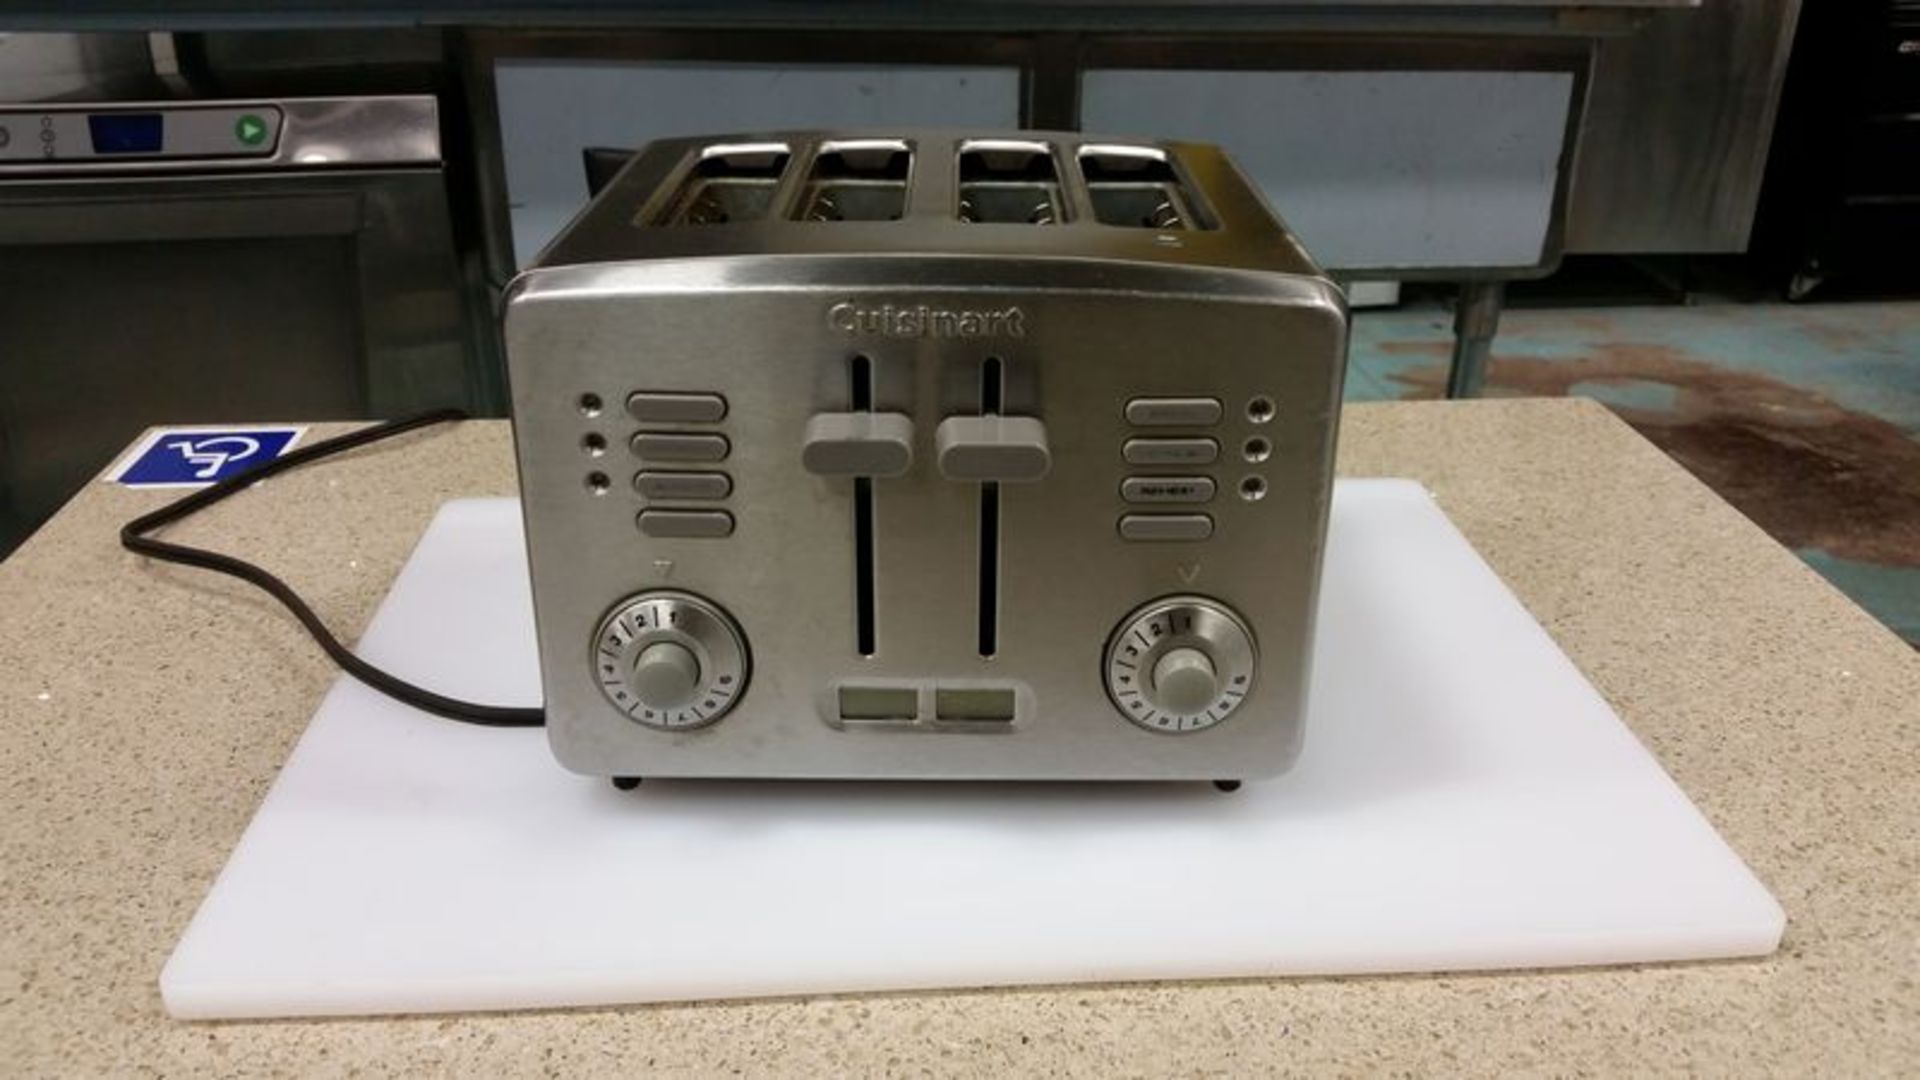 4 slice toaster, lot of cutlery & white cutting board